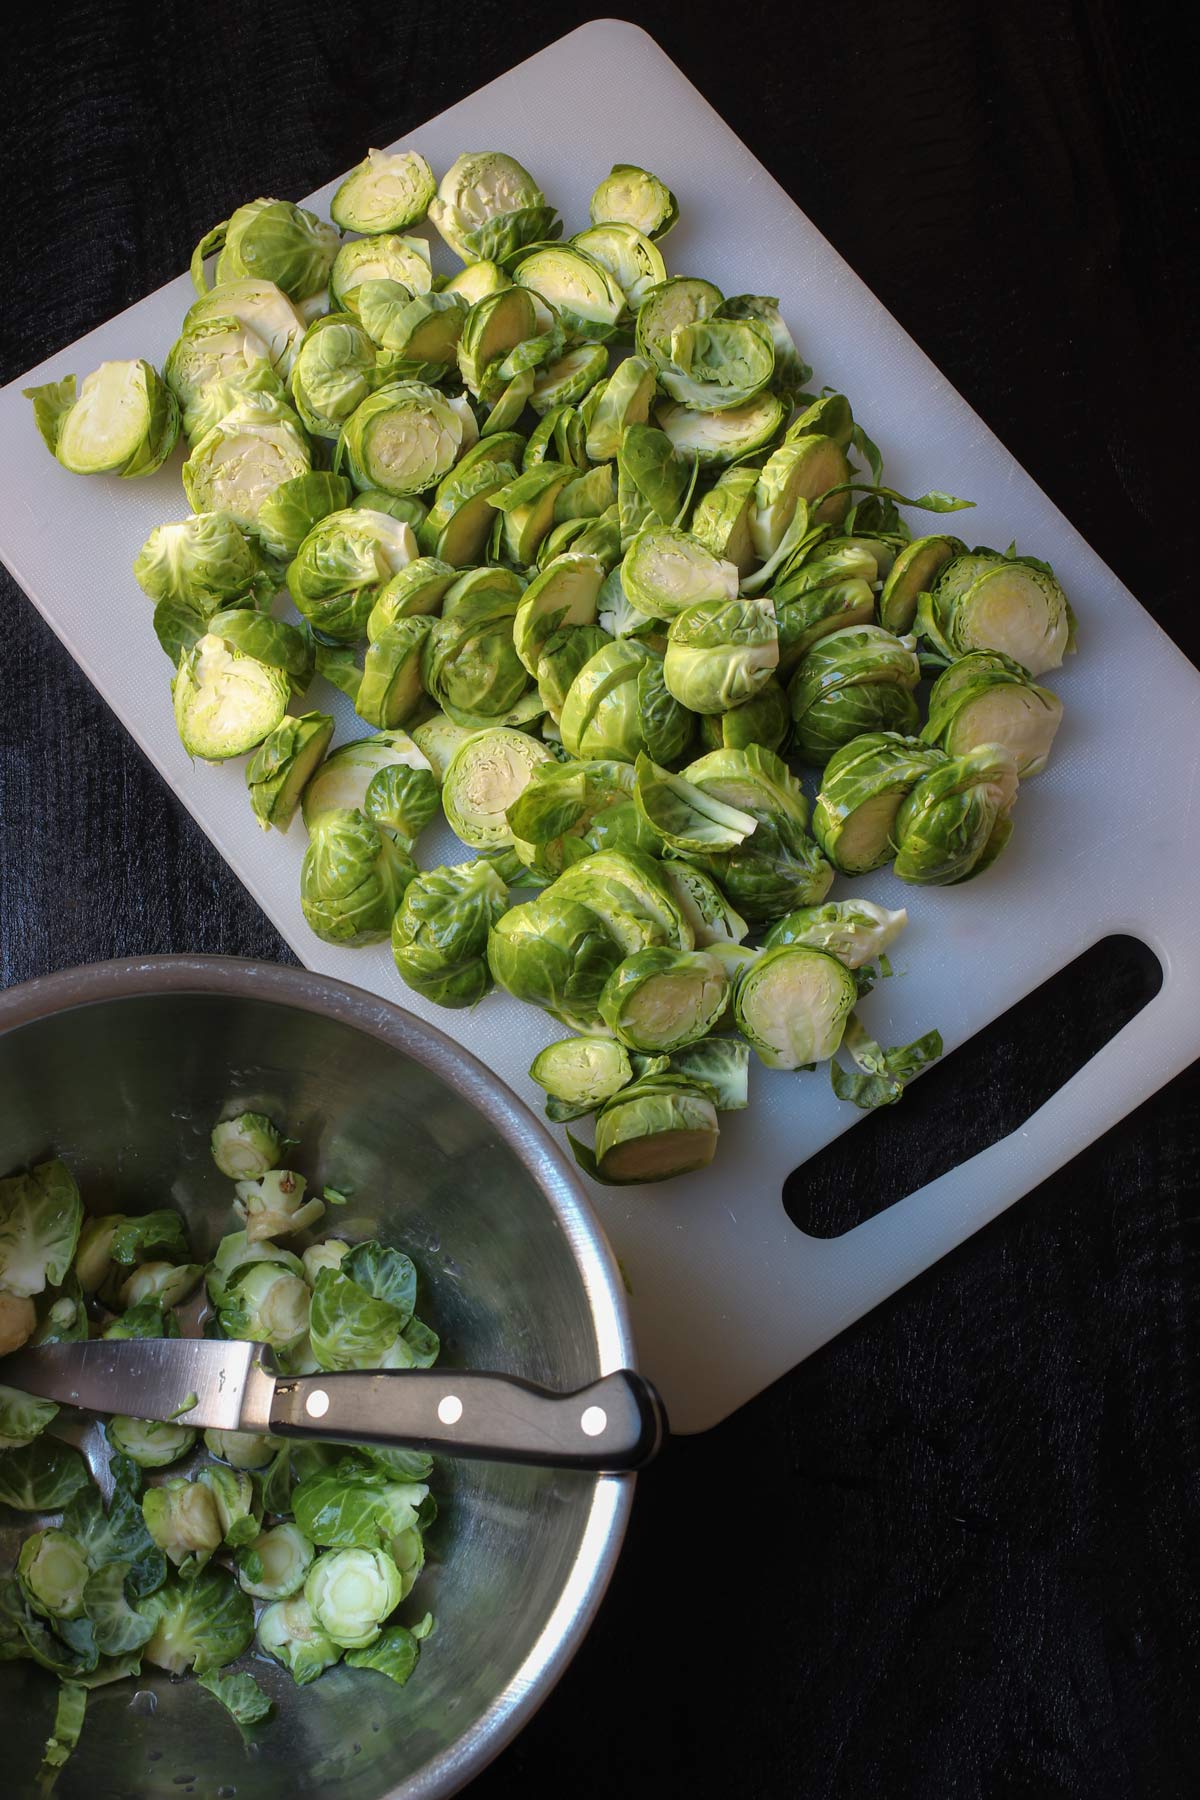 trimming Brussels sprouts to sauté